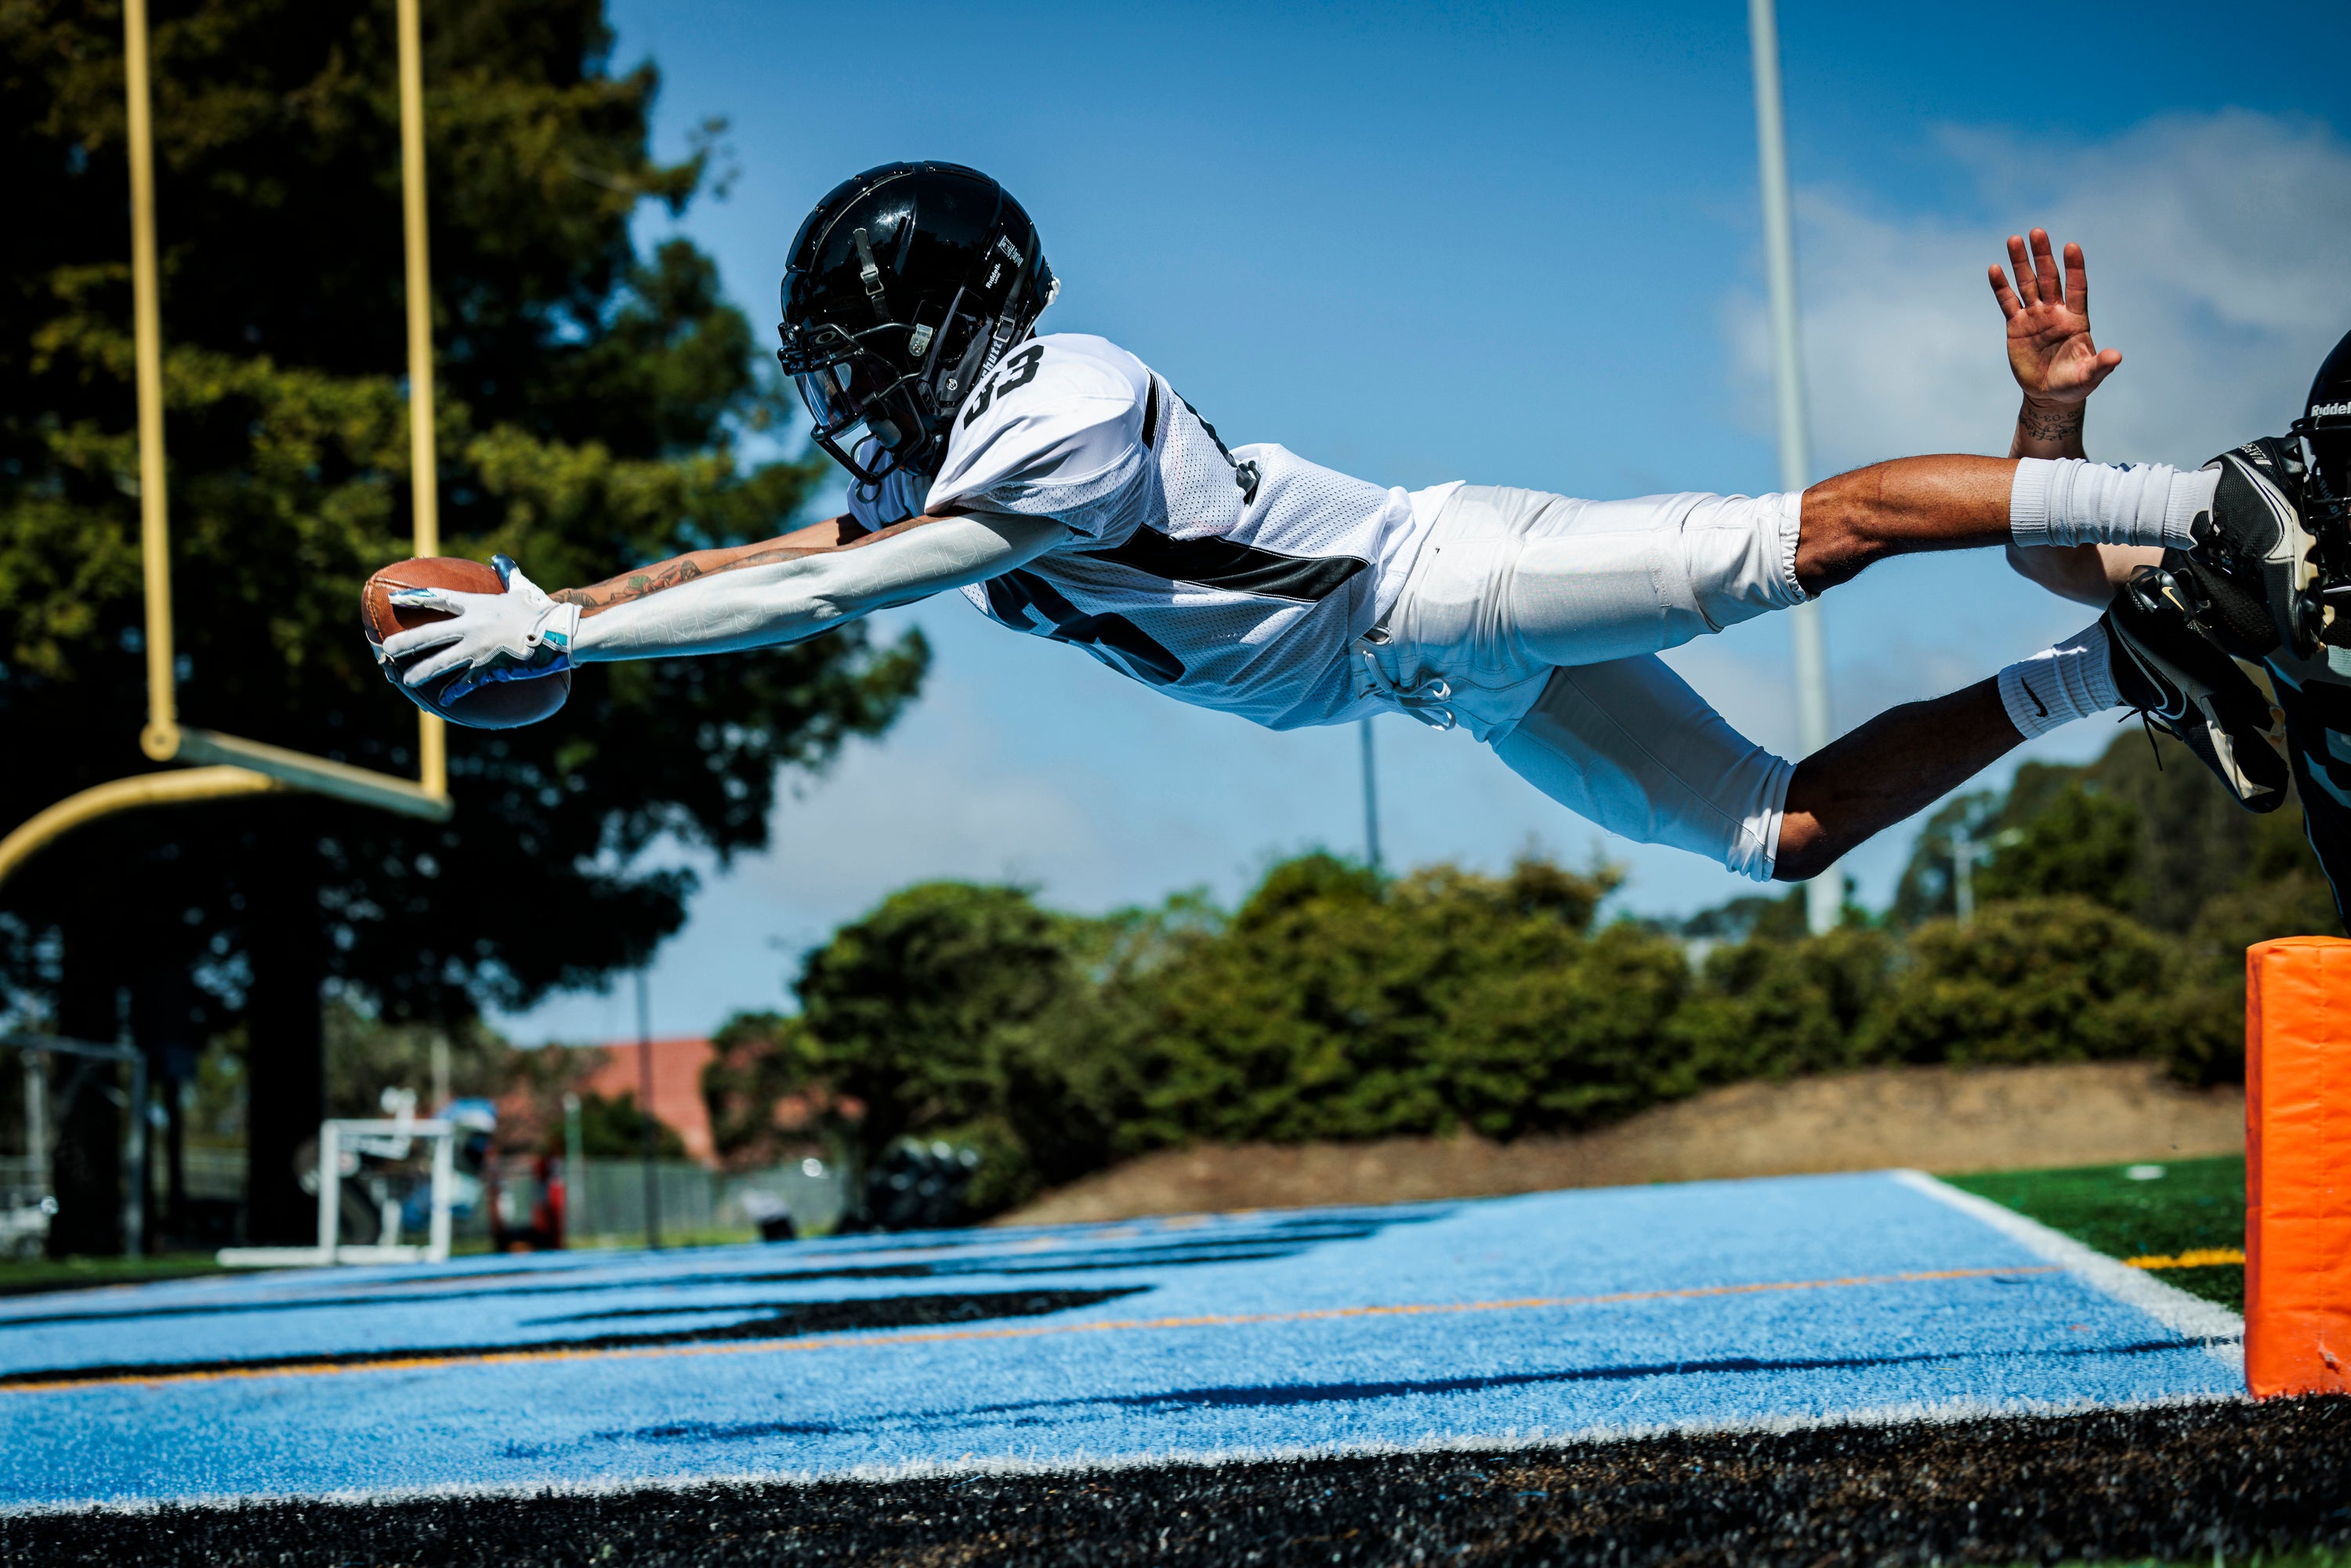 NEW Turf Tape from KT: The Ultimate Protection Against Turf Burns and Abrasions for Football Players